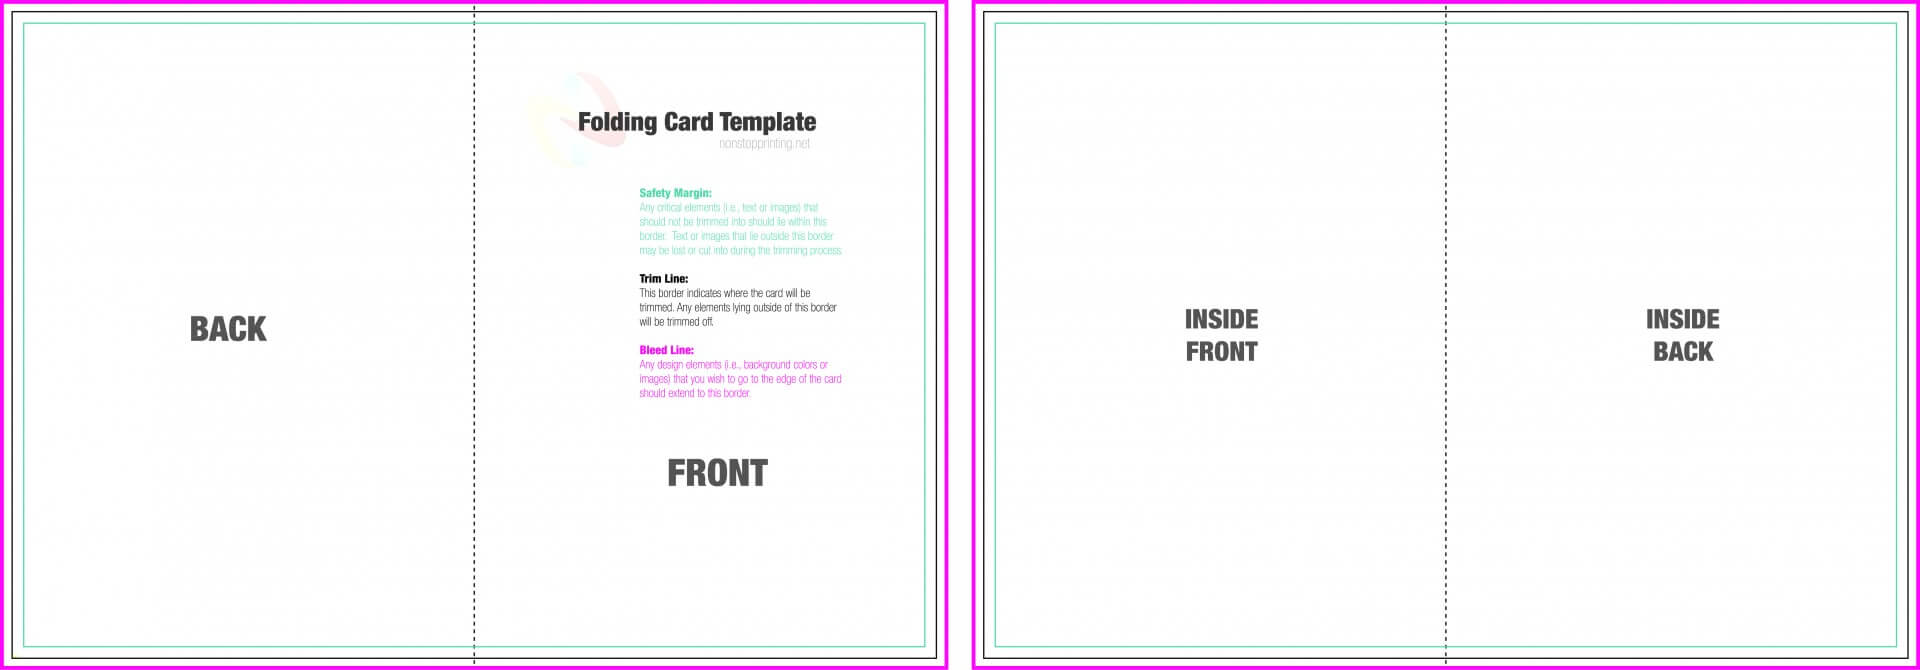 Unforgettable Blank Quarter Fold Card Template Free Ideas With Regard To Quarter Fold Greeting Card Template